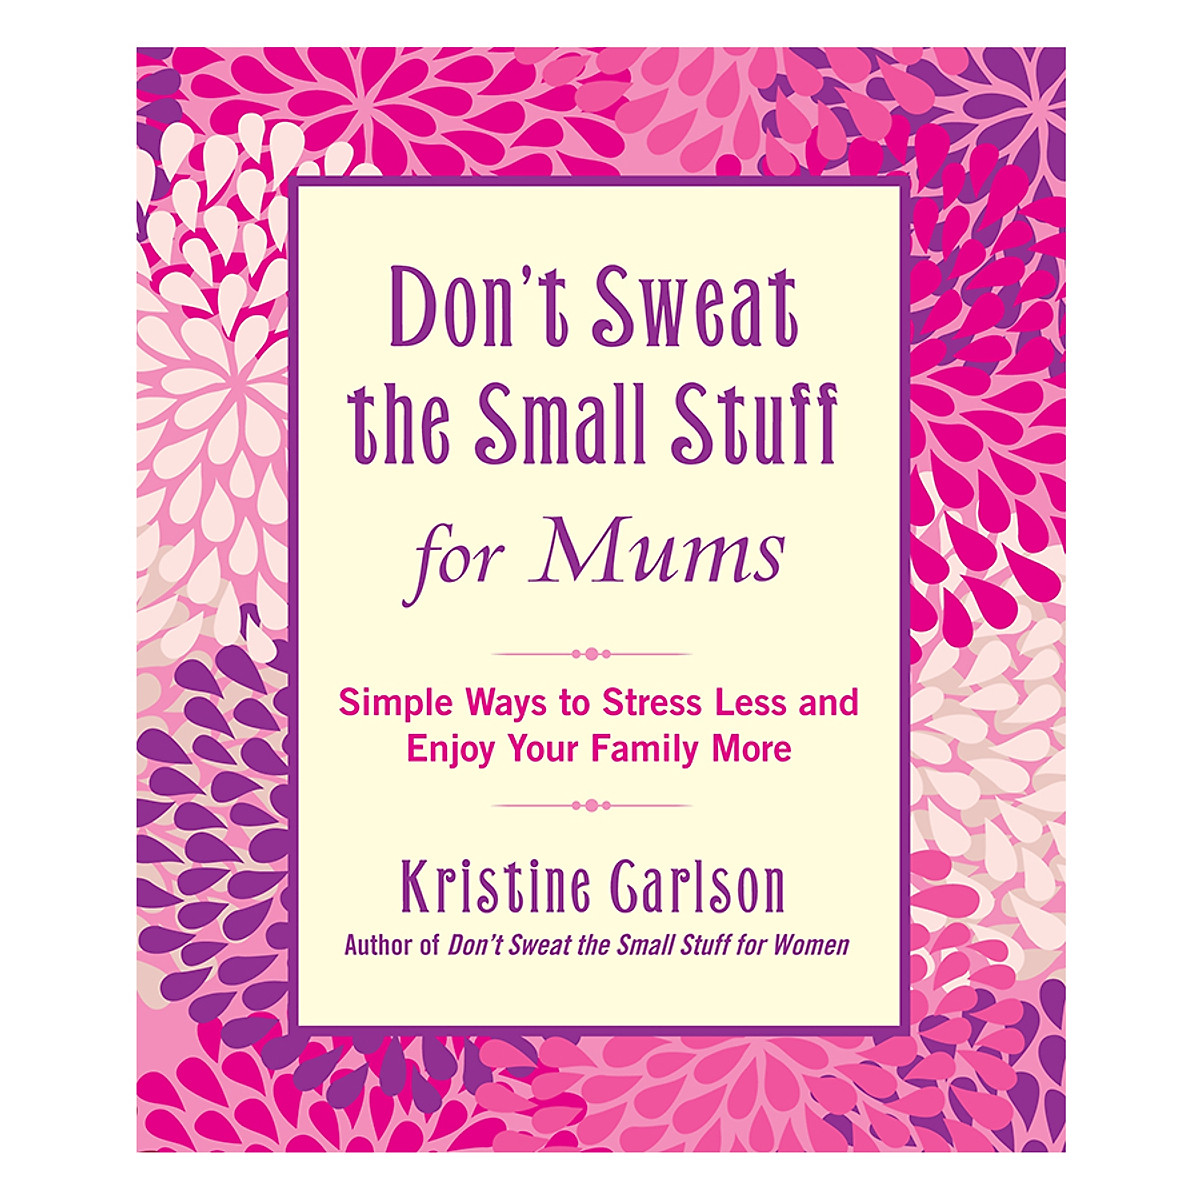 Don't Sweat The Small Stuff For Moms: Simple Ways to Stress Less and Enjoy Your Family More